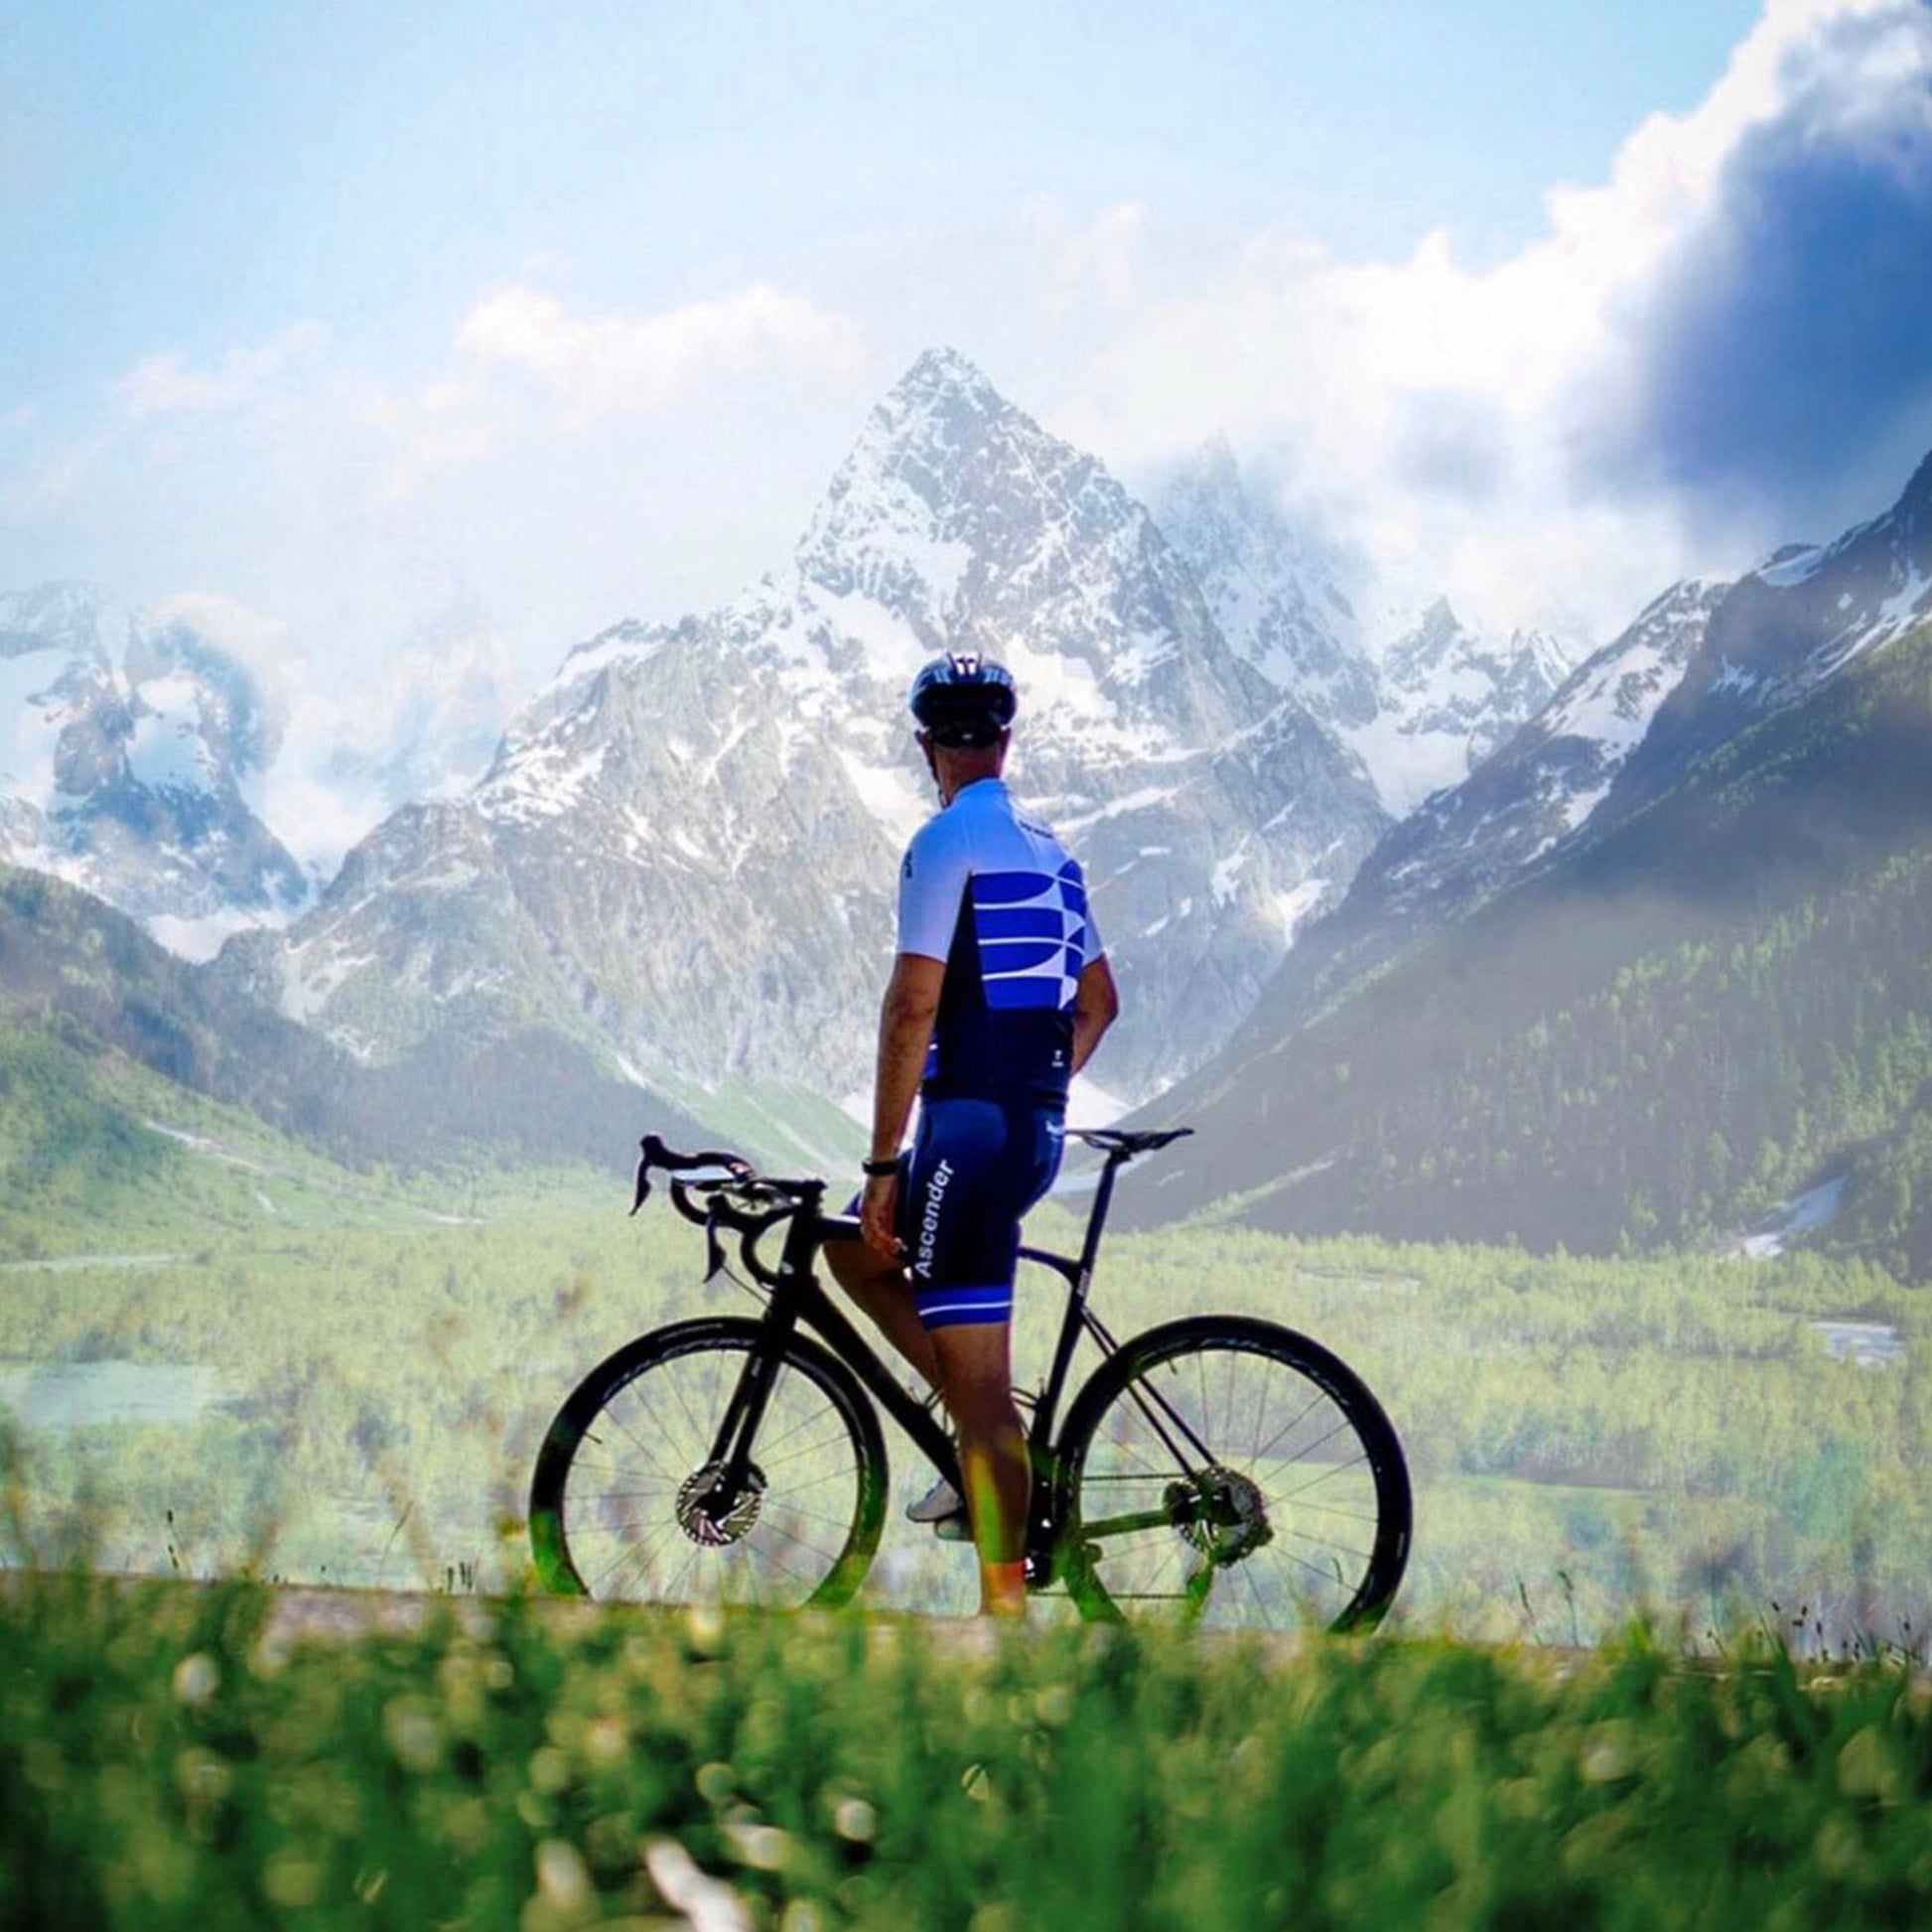 Mountain Edition Blue Short Sleeves Jersey from Ascender Cycling Club in Zürich Switzerland Instagram Photo